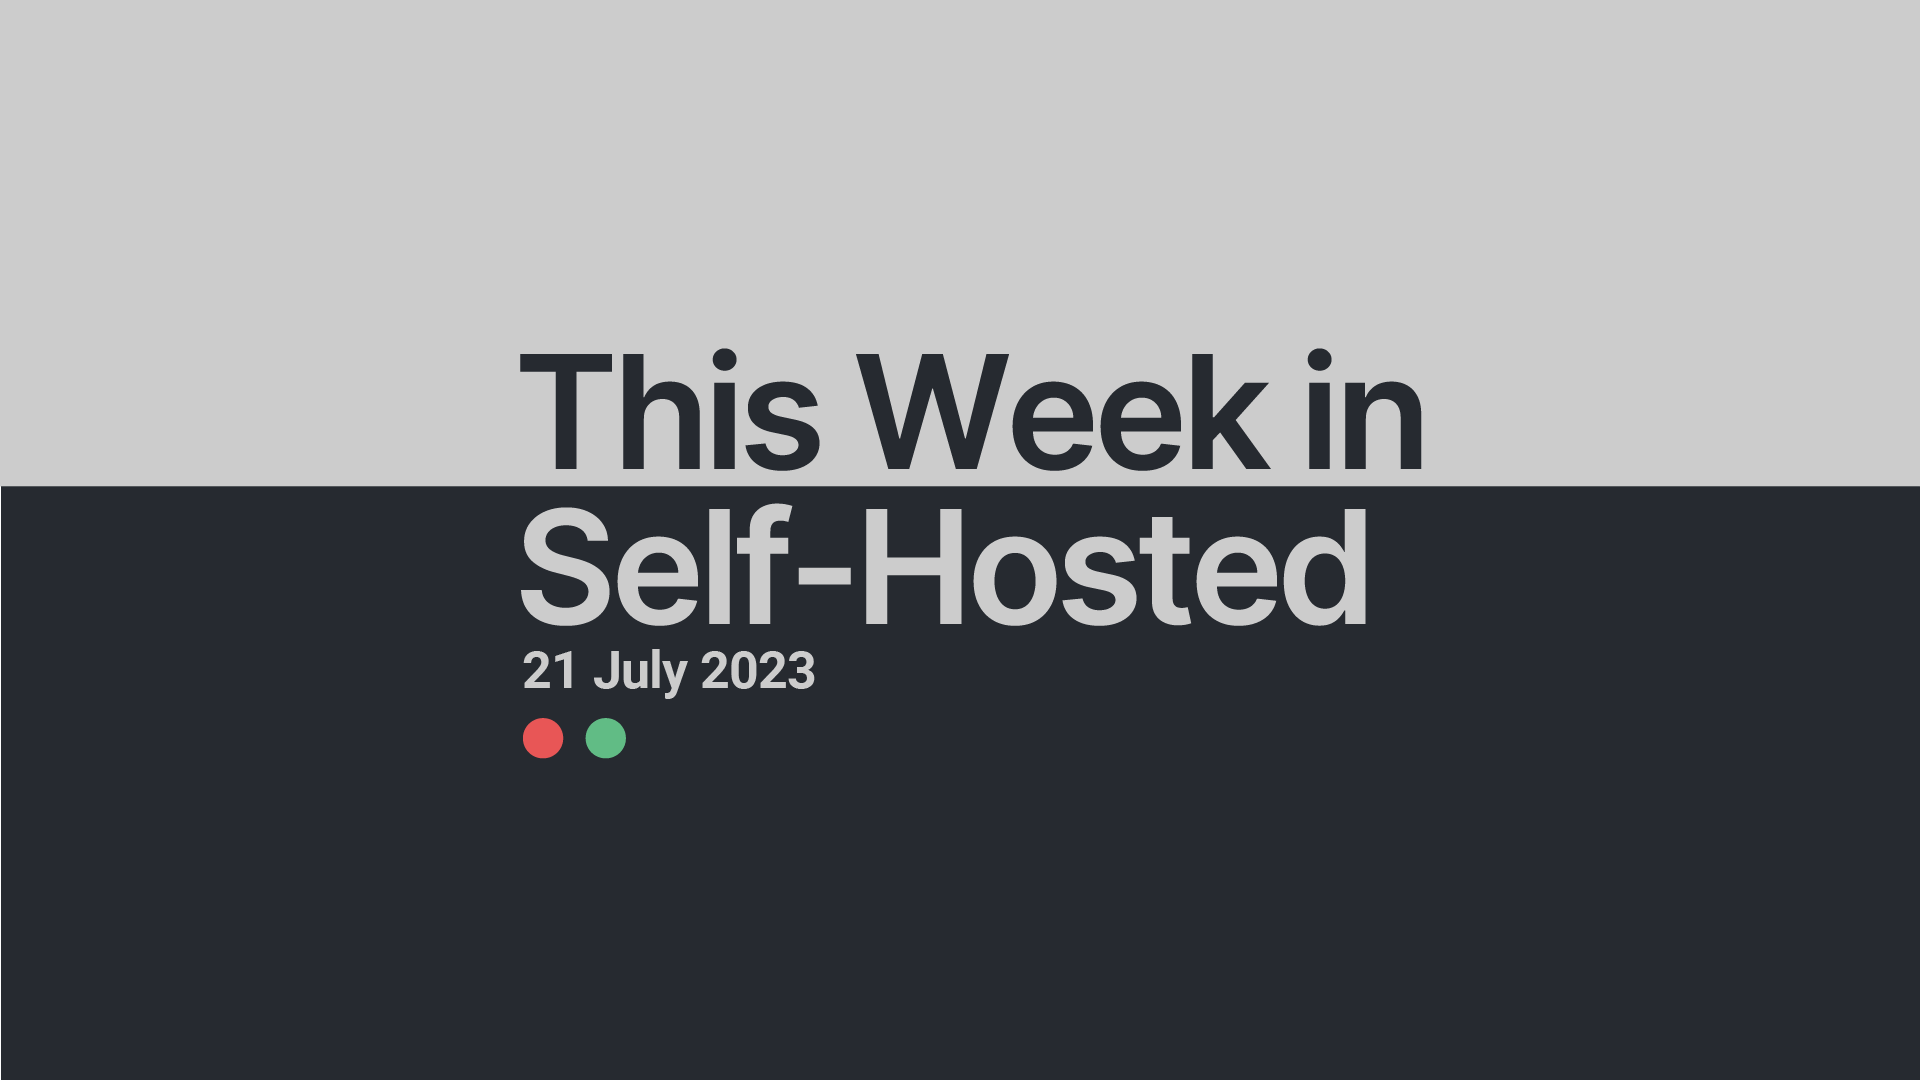 This Week in Self-Hosted (21 July 2023) Post image